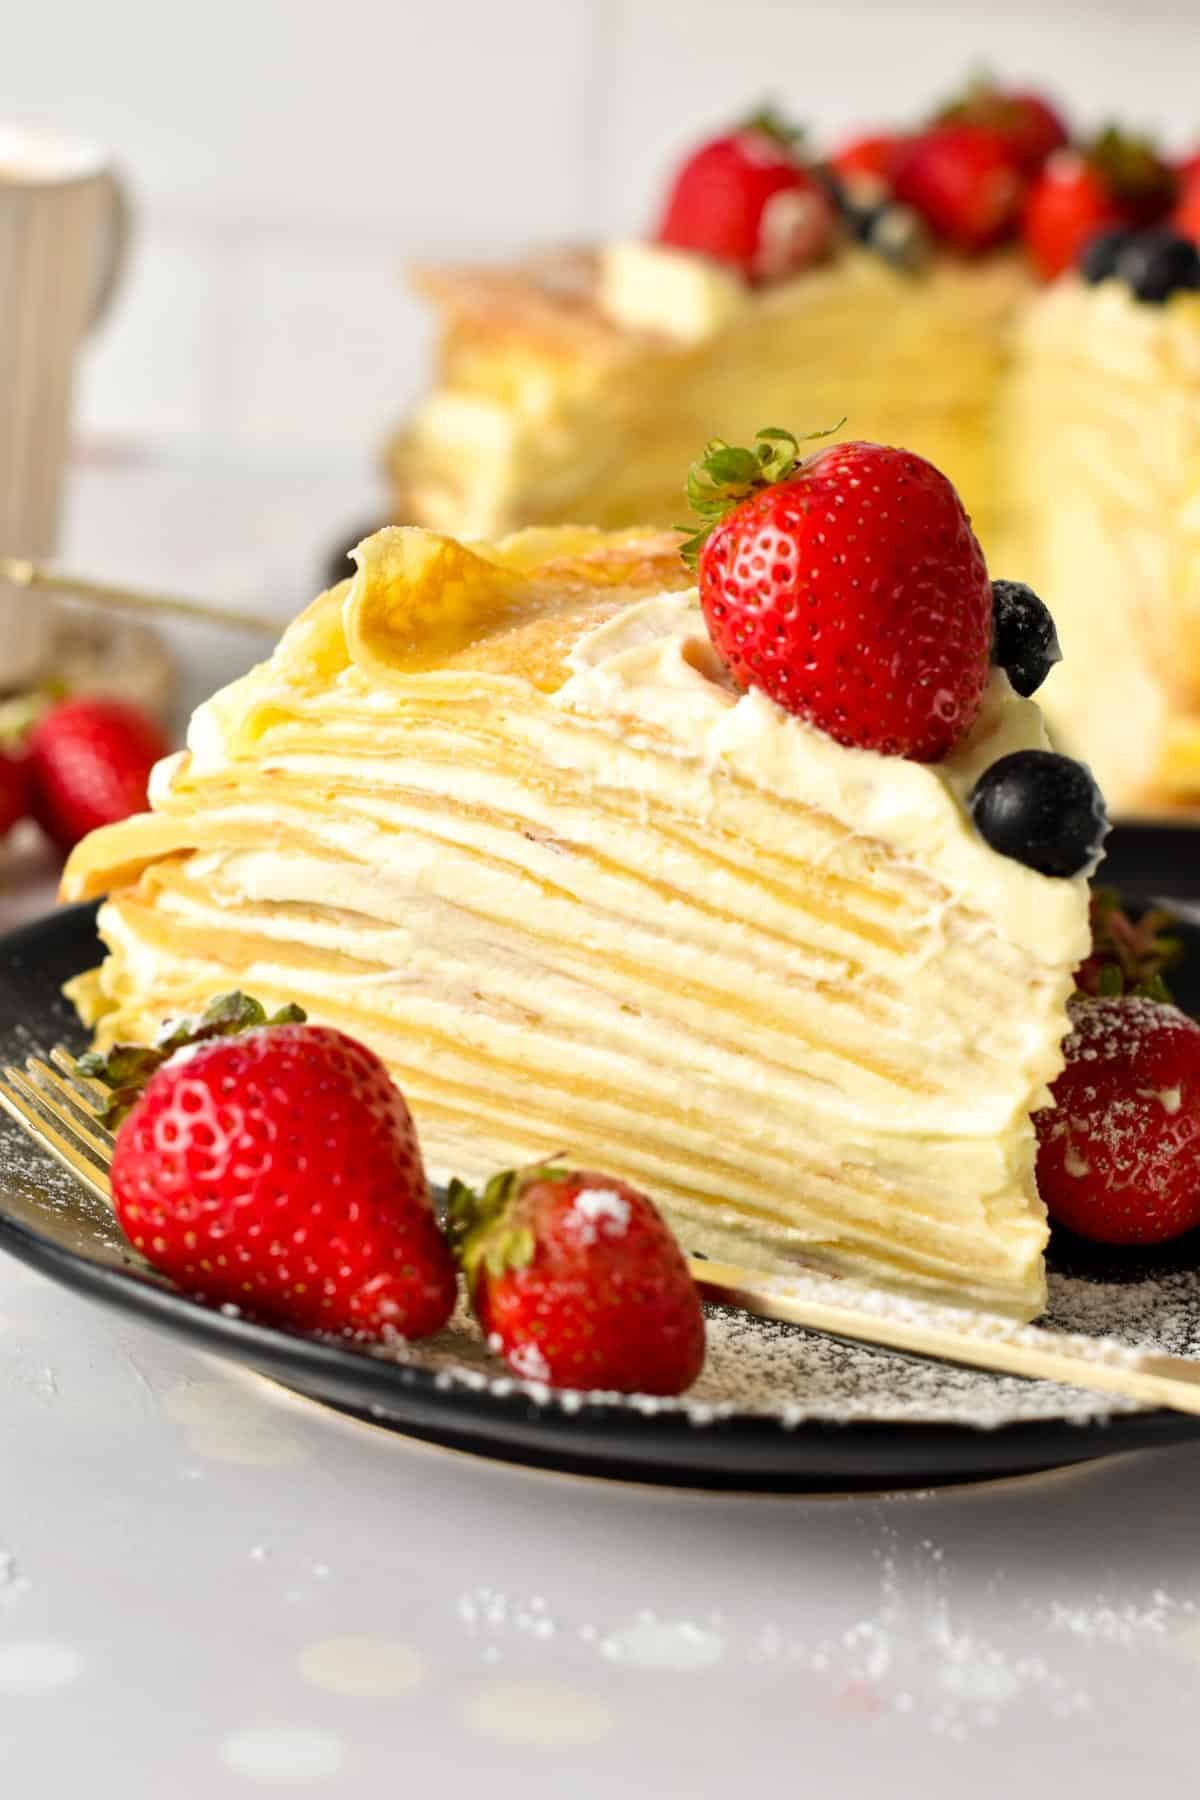 This Crepe Cake is a beautiful, decadent French cake made from layers of vanilla crepe filled with a thin layer of vanilla cream. It's a tasty cake for a birthday or dessert to impress your guest.